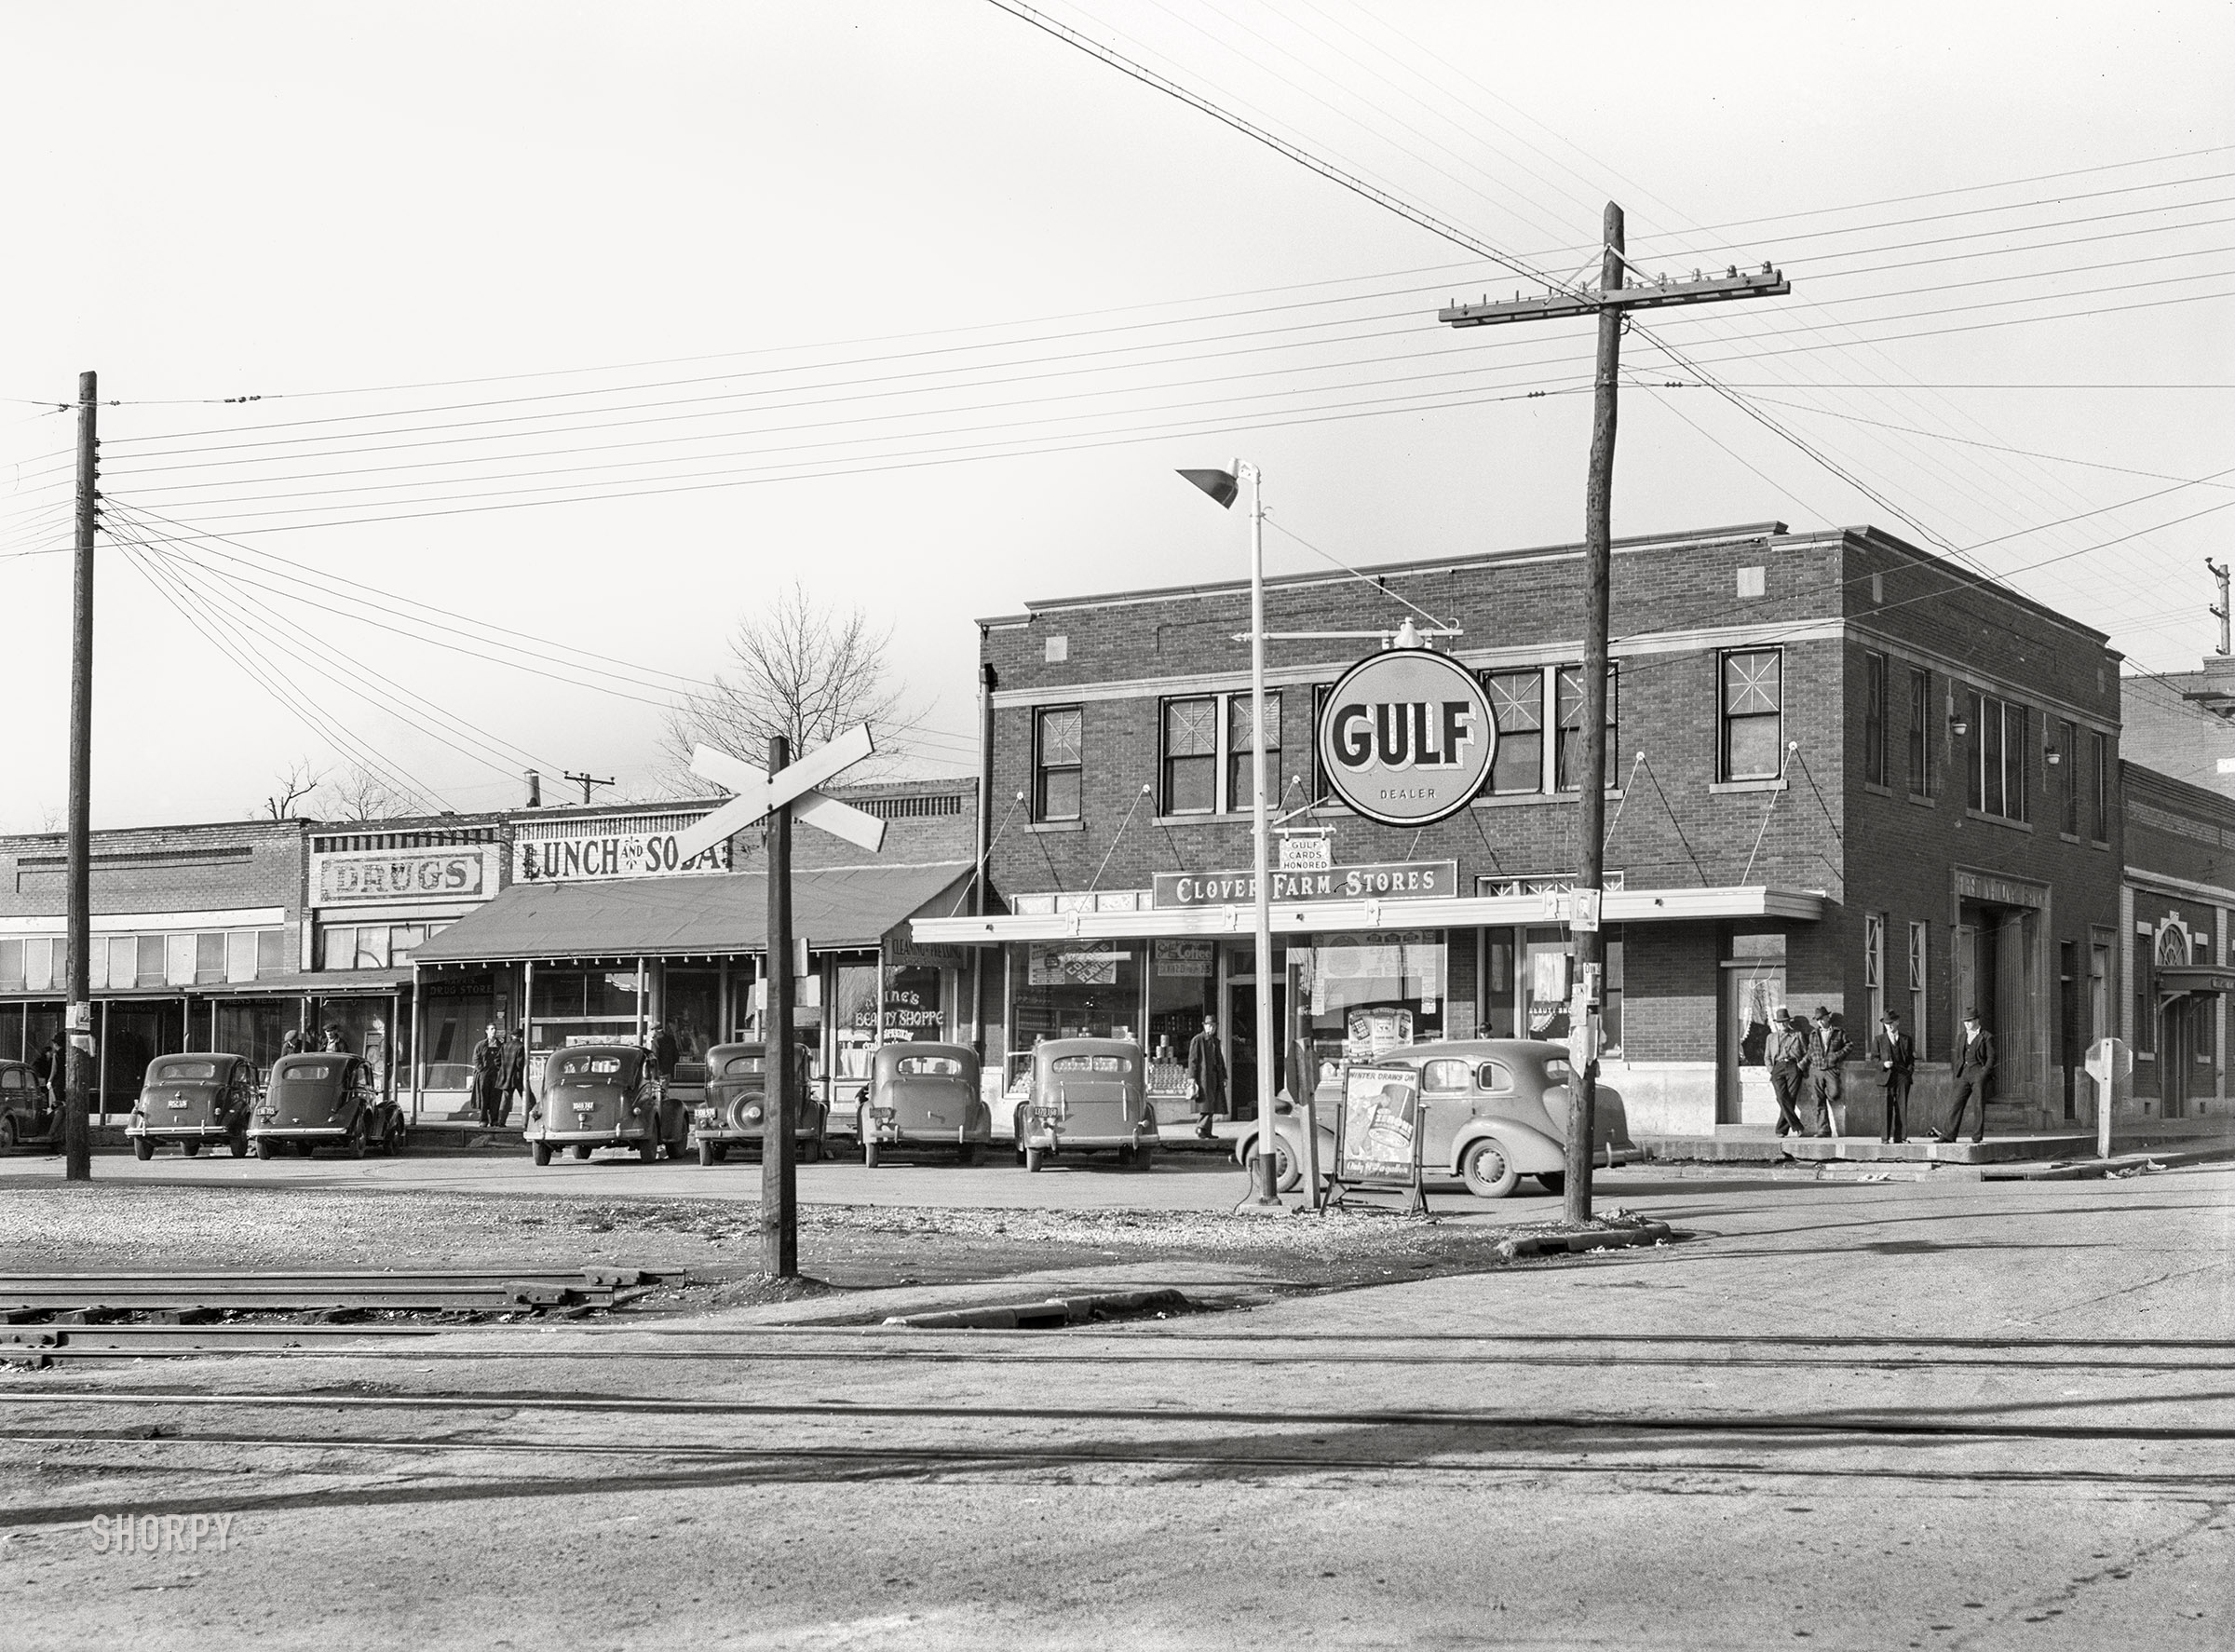 January 1939. "Carrier Mills, Southern Illinois. Small towns and rural areas of a once prosperous mining region, suffering from the Depression." Medium format acetate negative by Arthur Rothstein for the Farm Security Administration. View full size.